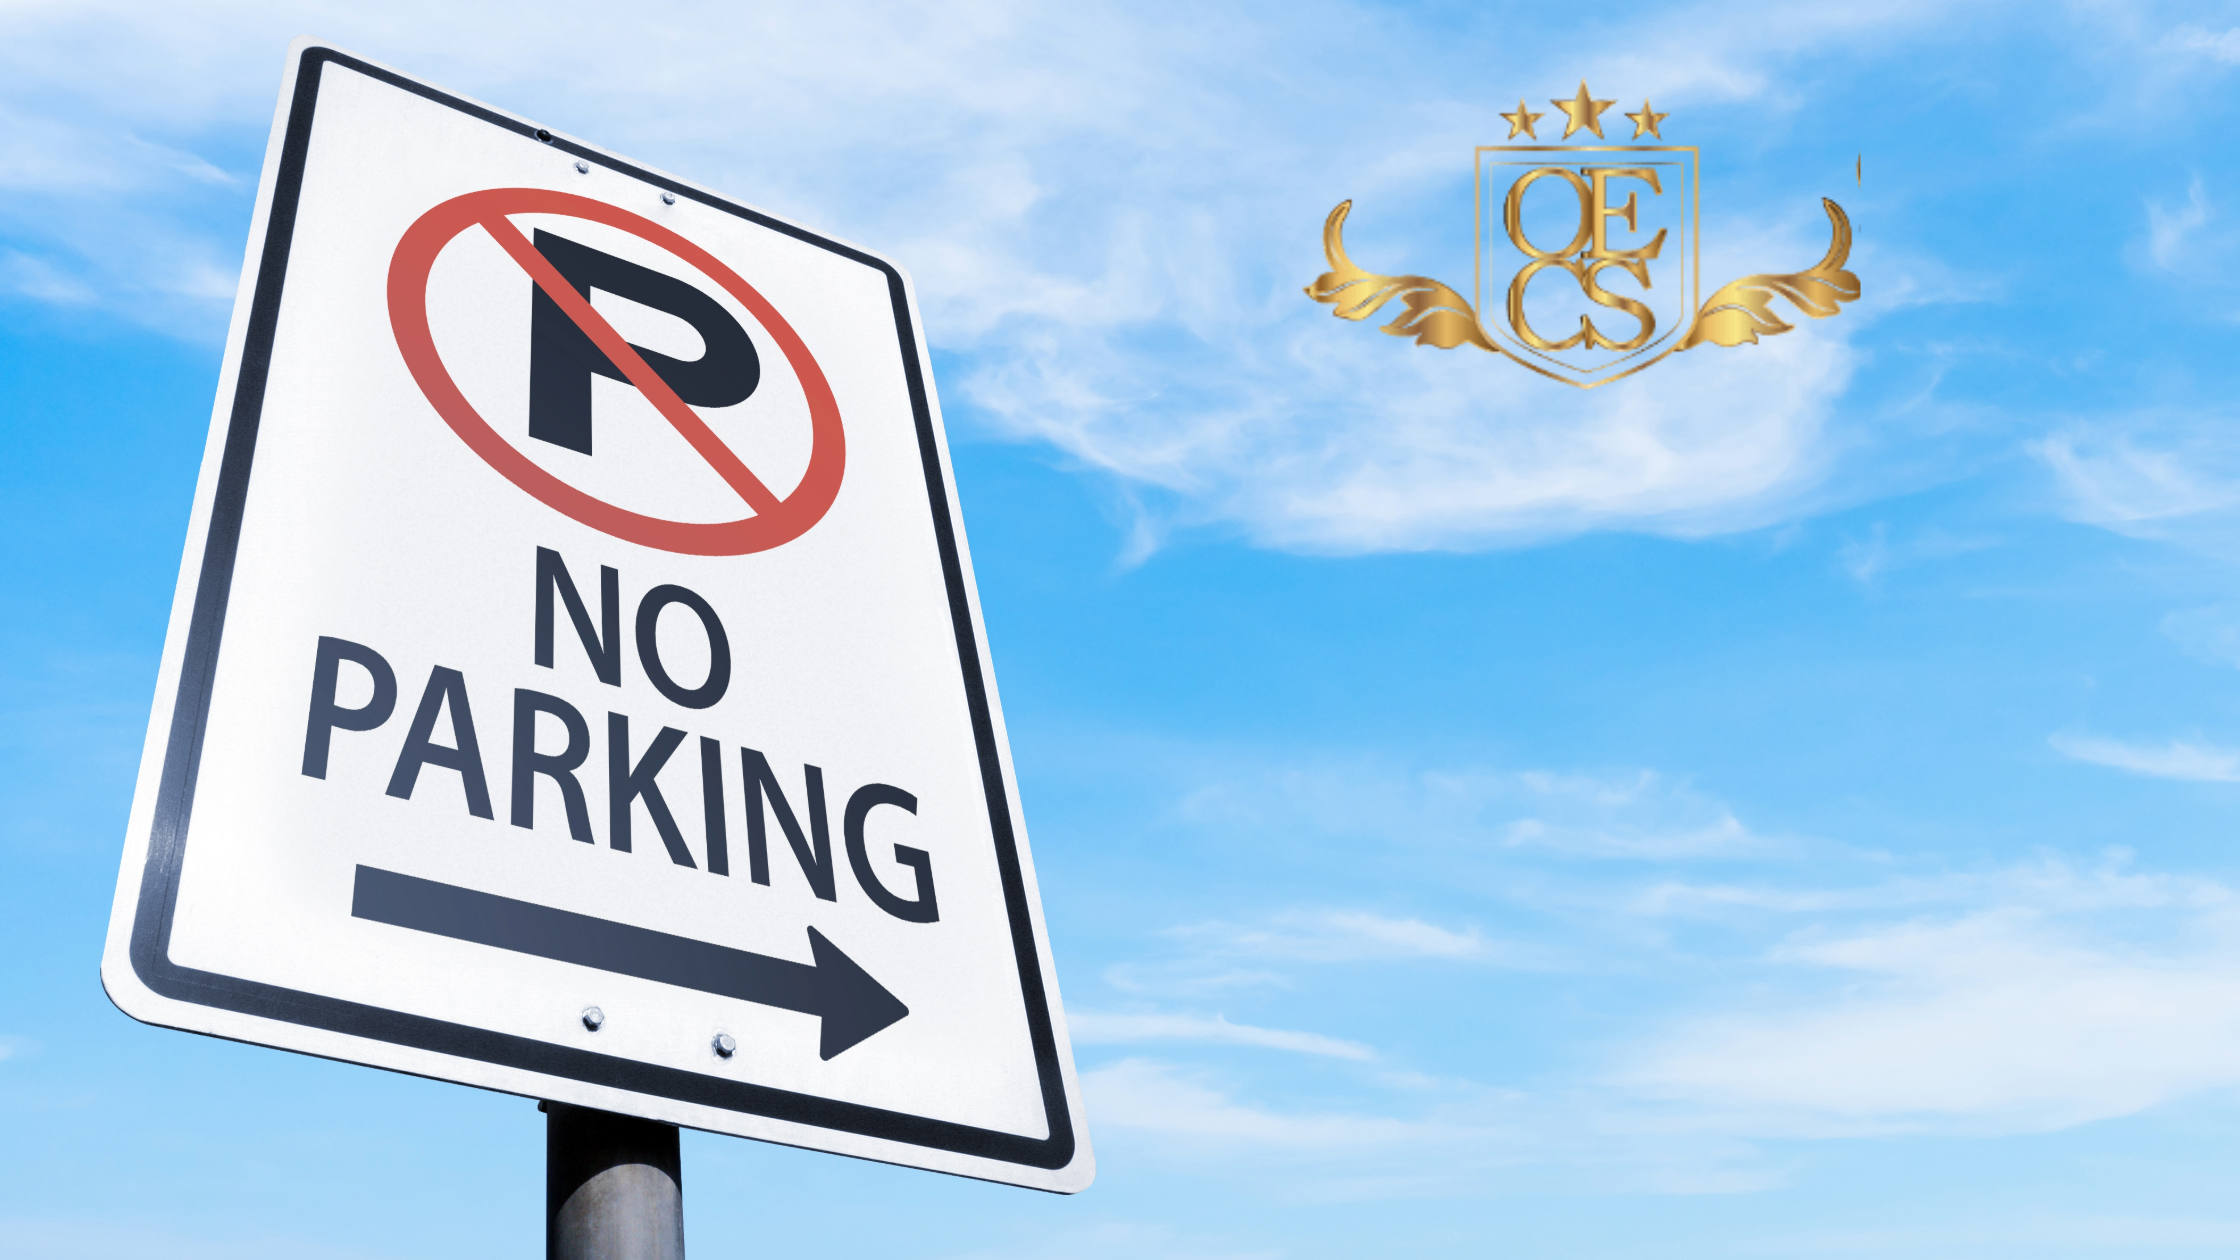 No parking hassles when using private car rental